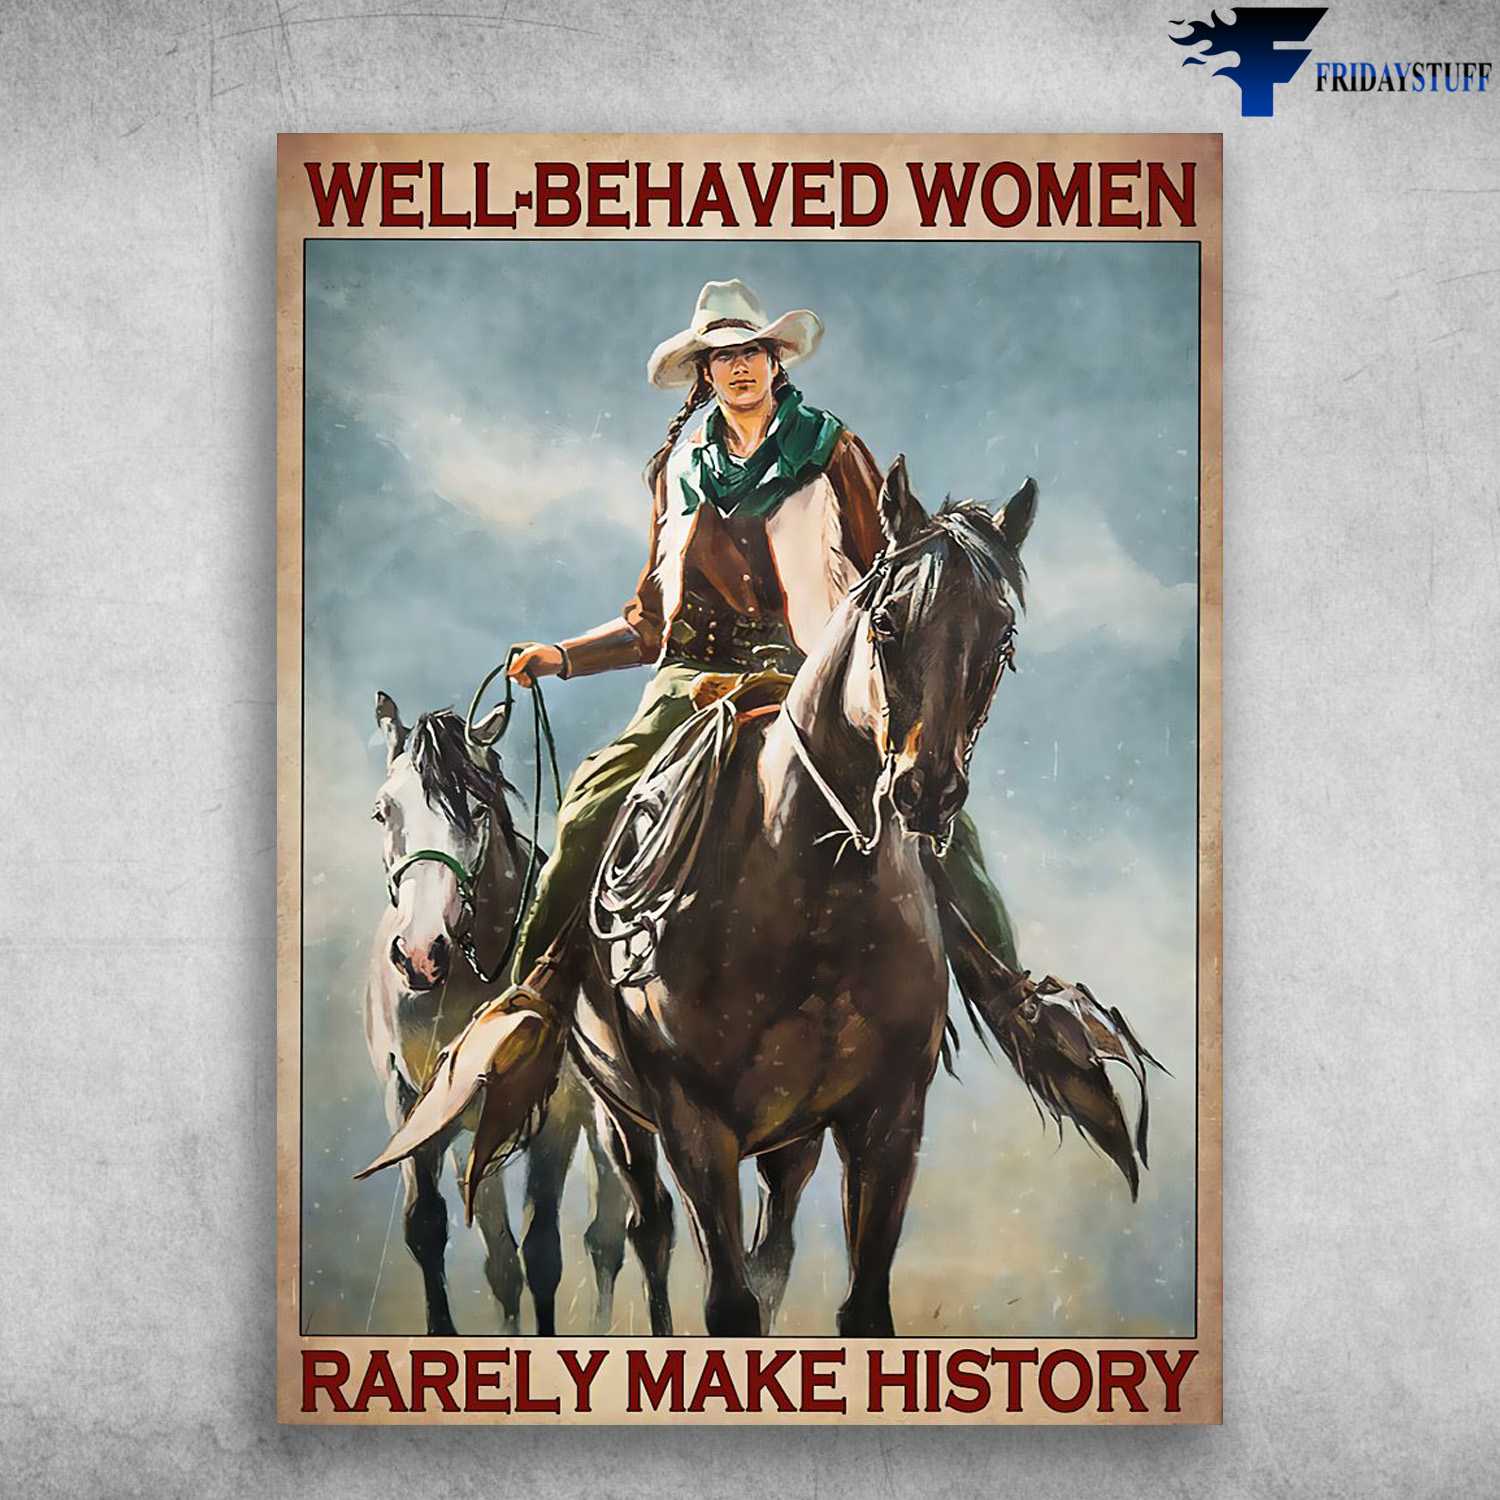 Horse Riding, Cowgirl Poster - Well-Behaved Woman, Rarely Make History